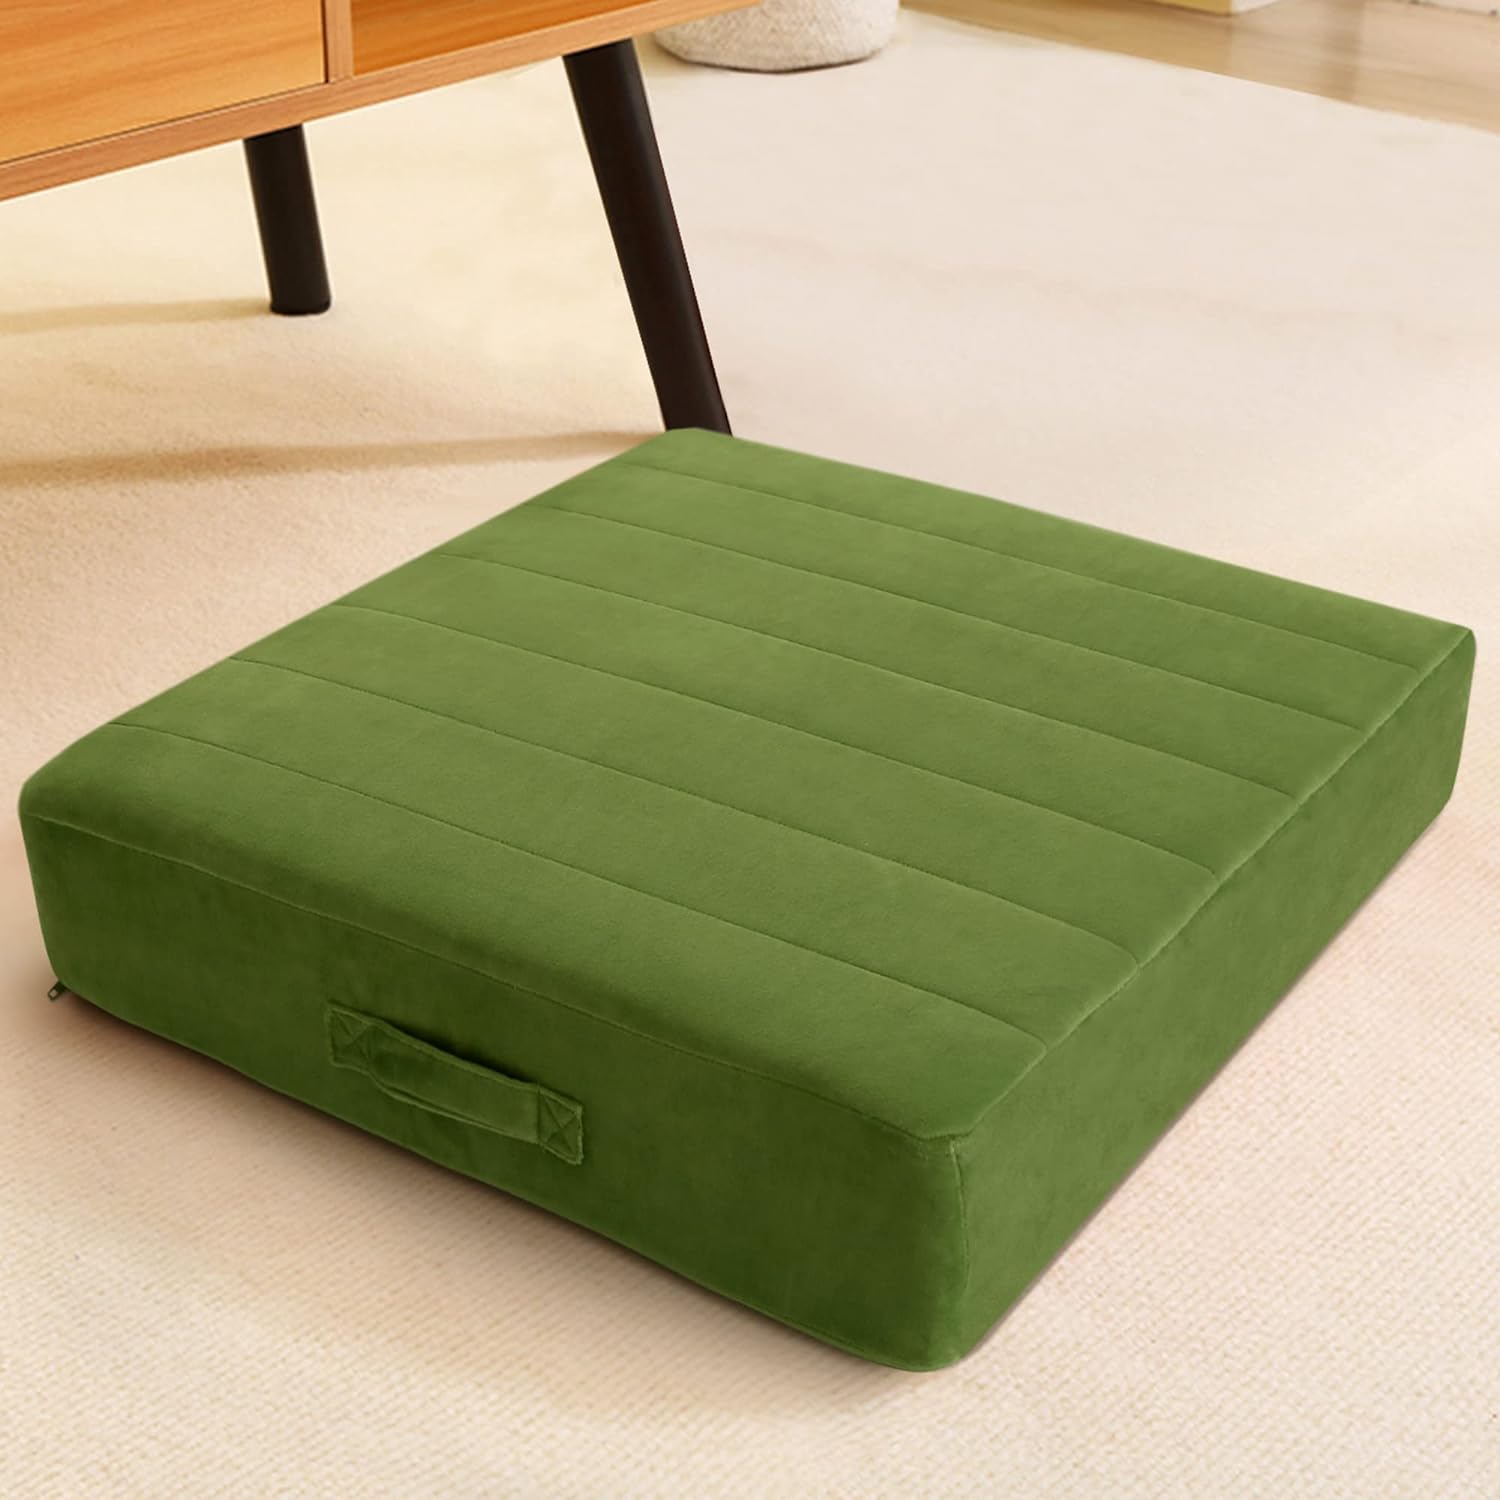 MeMoreCool Square Floor Pillow Seating for Adults Kids, Large Meditation Cushion Floor Pillow with Thick Foam & Soft Tufted Cover, Washable Big Pillow Seat Floor Cushion for Sitting Yoga 22" Green